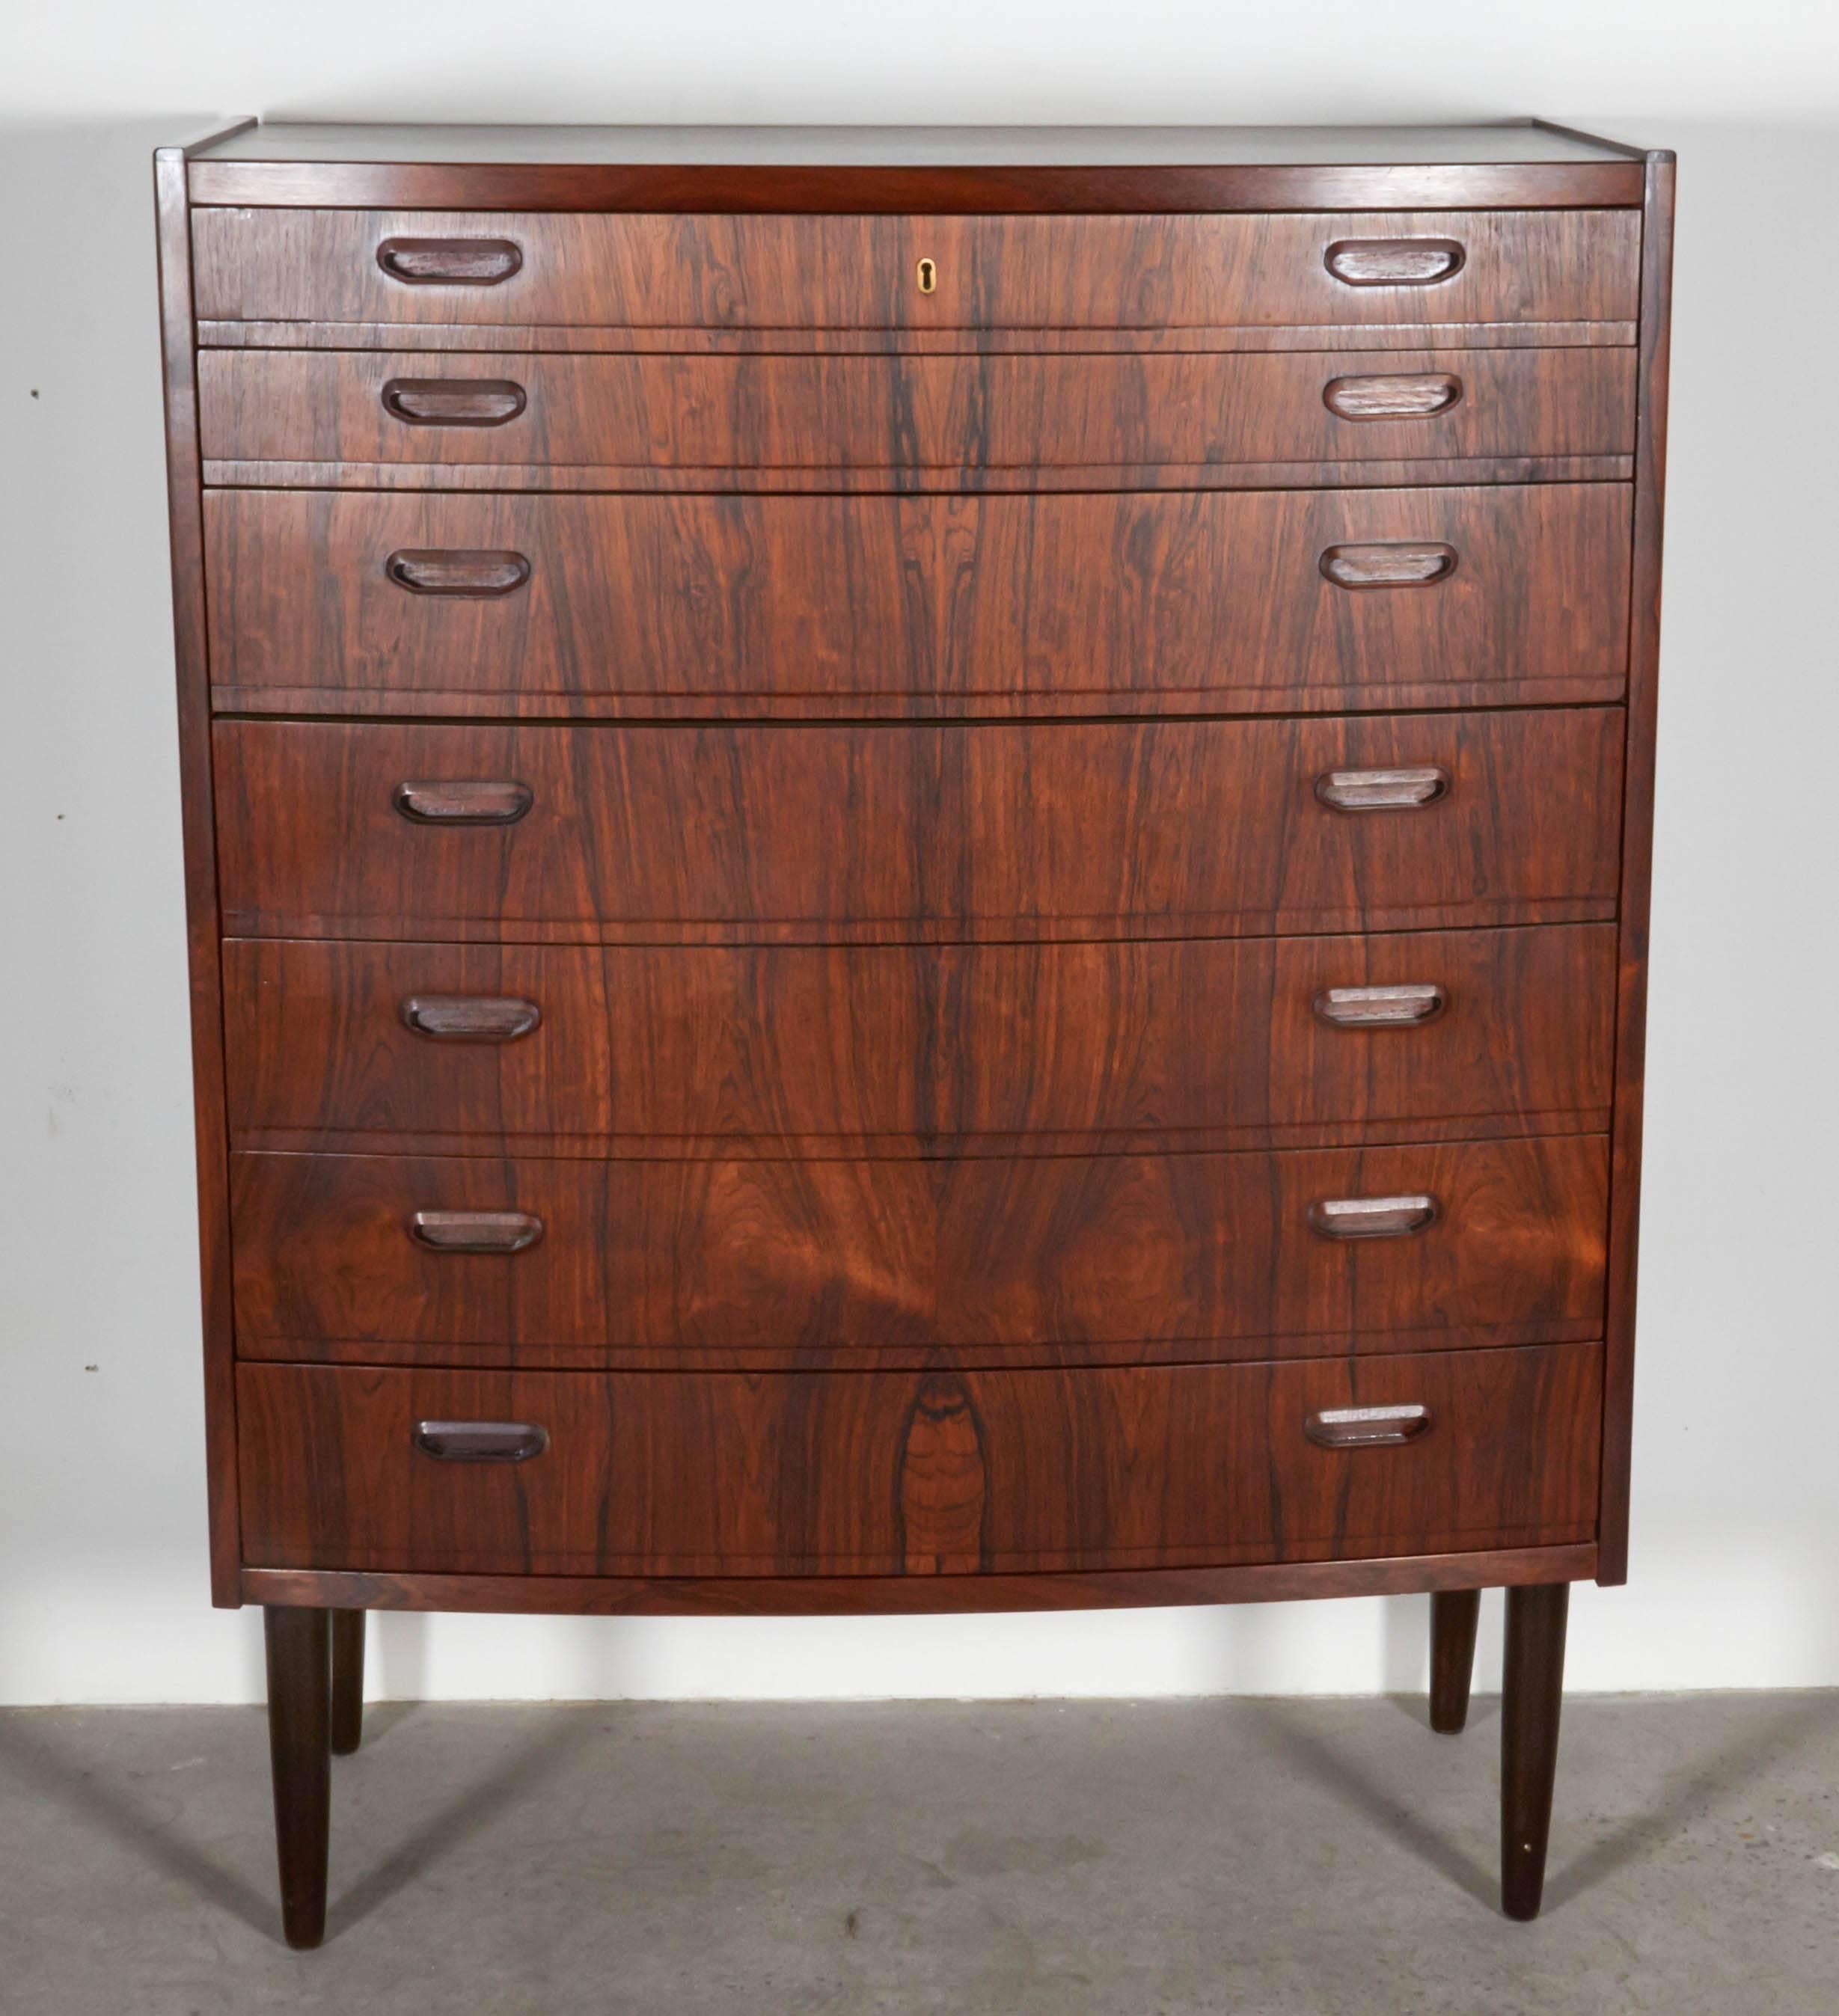 Vintage 1960s Highboy Dresser in Rosewood 

This Vintage Chest of Drawers is in excellent, like new condition. There are 5 regular sized drawers and 2 more shallow drawers at the top for your accessories. Can be used for clothing or linen storage.